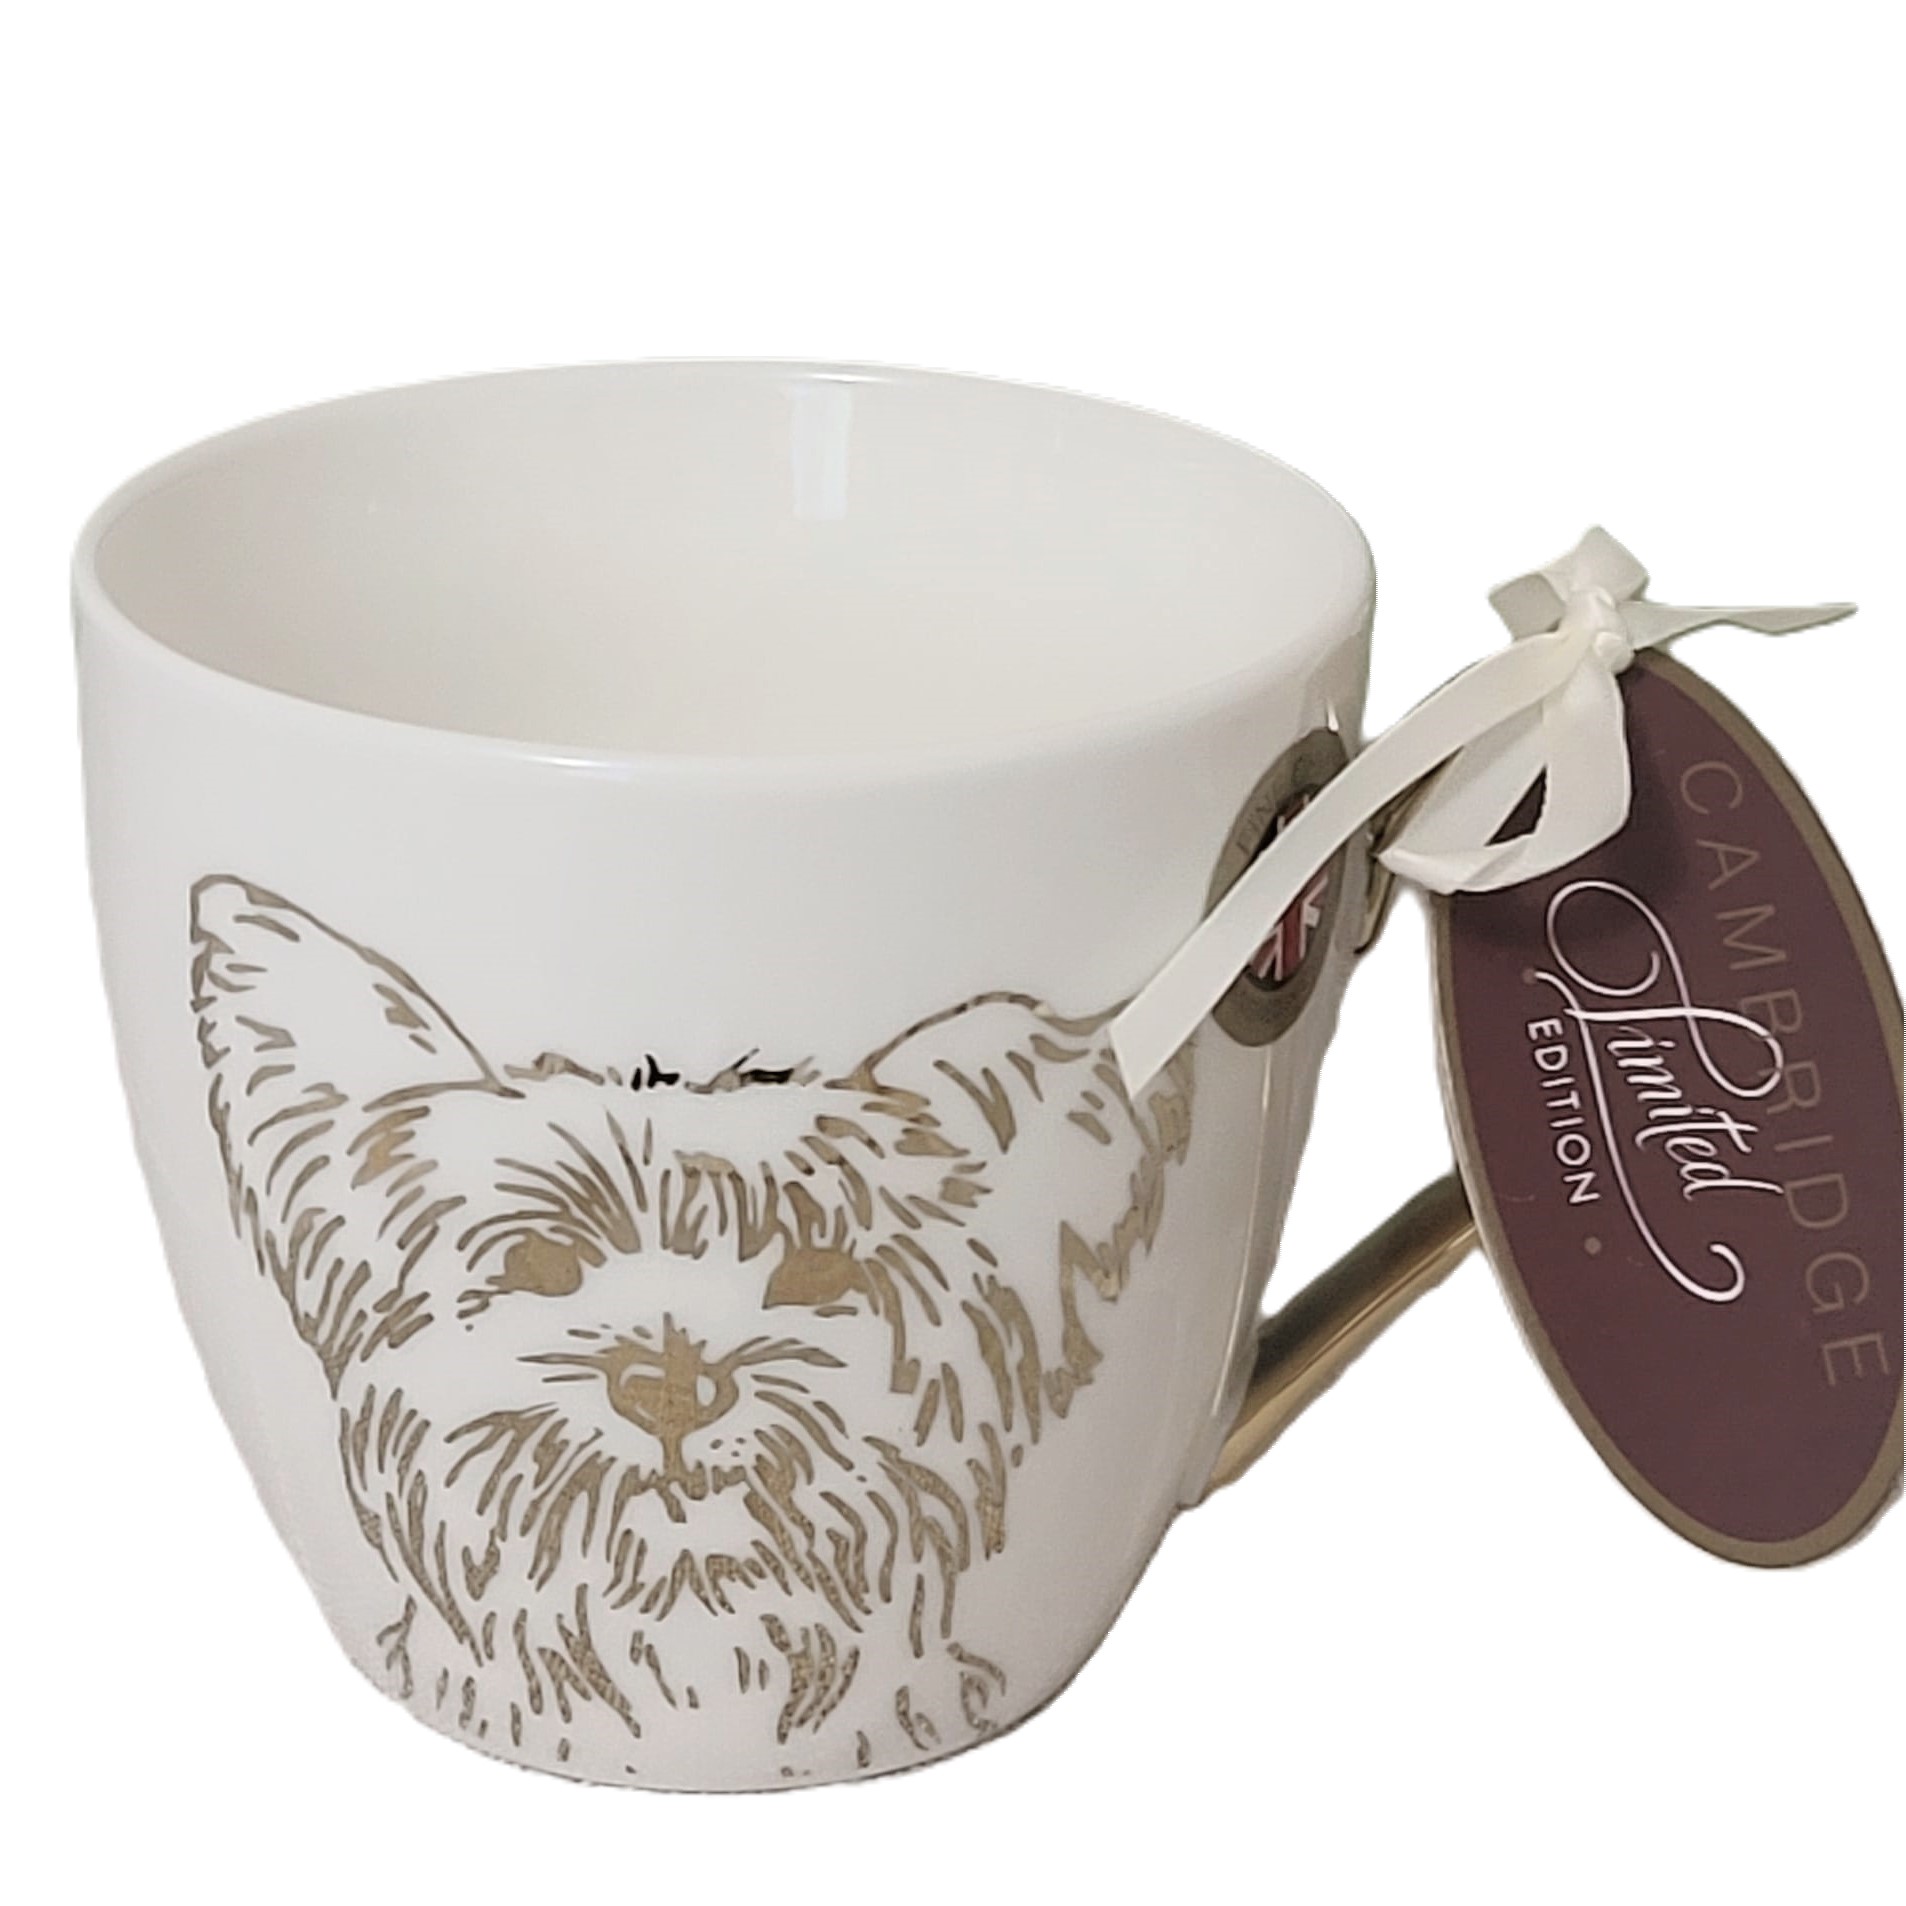 Cambridge Limited Edition Mug Cup Yorkie Yorkshire Terrier nwt